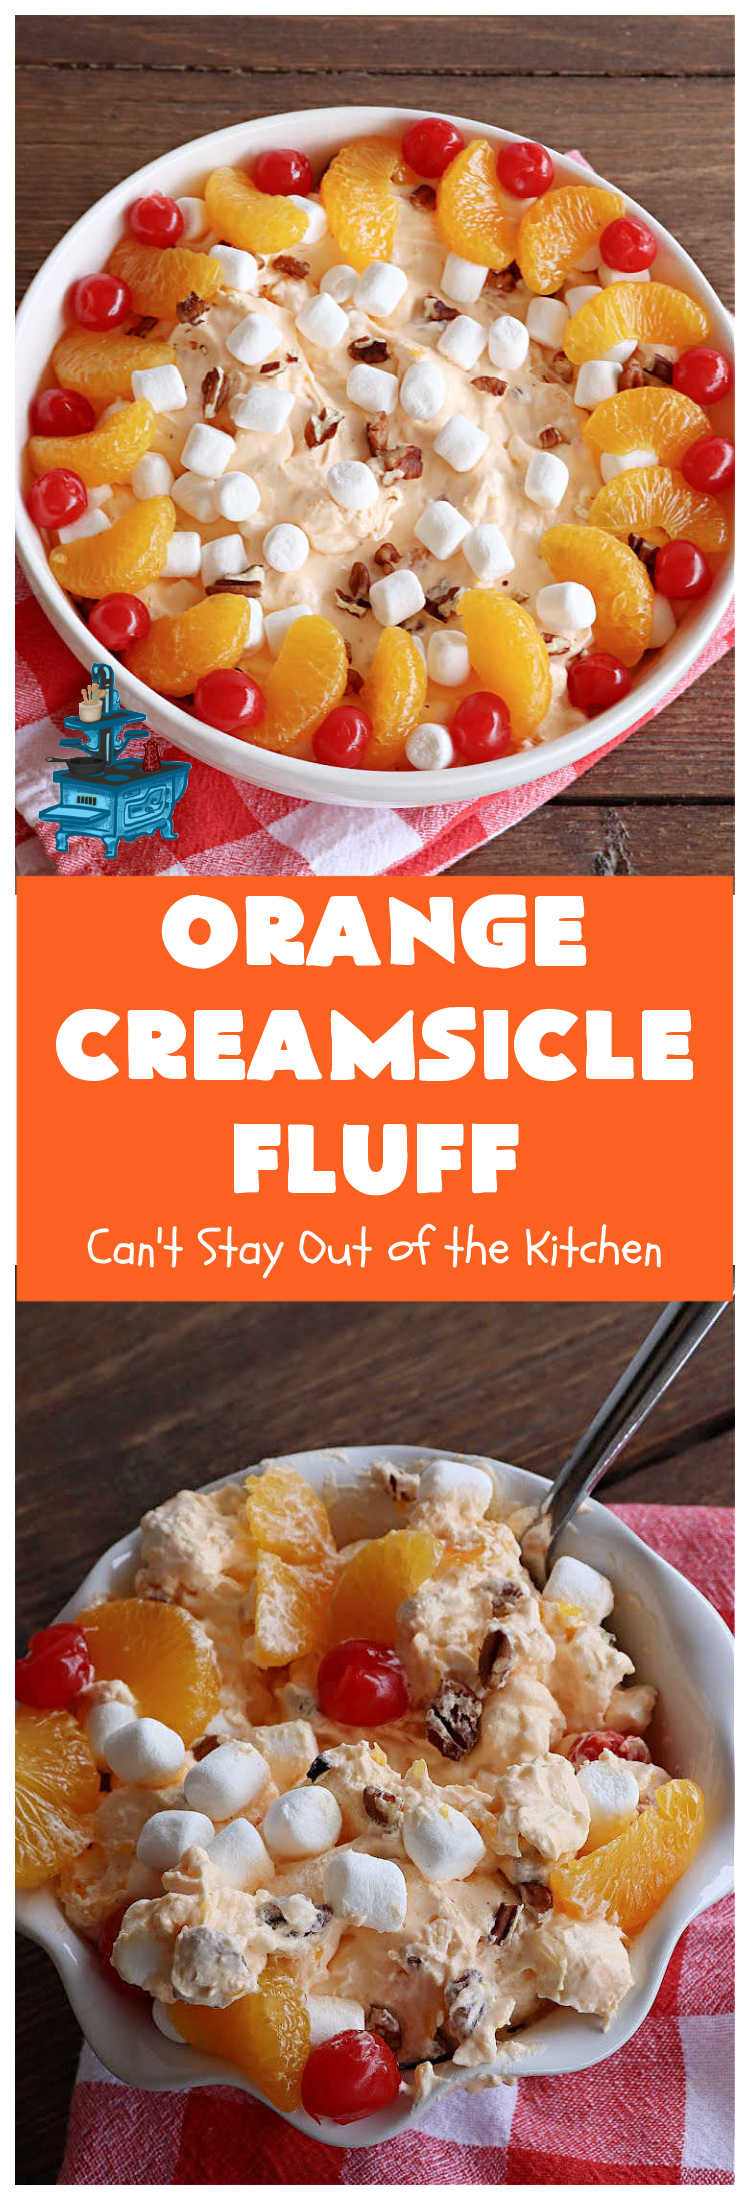 Orange Creamsicle Fluff | Can't Stay Out of the Kitchen | this fluffy #FruitSalad is outrageously good! It's smooth & creamy & tastes like eating #OrangeCreamsicle. #OrangeExtract makes it just pop in flavor. Terrific for company or #holiday dinners like #Easter, #MothersDay or #FathersDay. #pecans #marshmallows #MandarinOranges #MaraschinoCherries #OrangeCreamsicleFluffOrange Creamsicle Fluff | Can't Stay Out of the Kitchen | this fluffy #FruitSalad is outrageously good! It's smooth & creamy & tastes like eating #OrangeCreamsicle. #OrangeExtract makes it just pop in flavor. Terrific for company or #holiday dinners like #Easter, #MothersDay or #FathersDay. #pecans #marshmallows #MandarinOranges #MaraschinoCherries #OrangeCreamsicleFluff